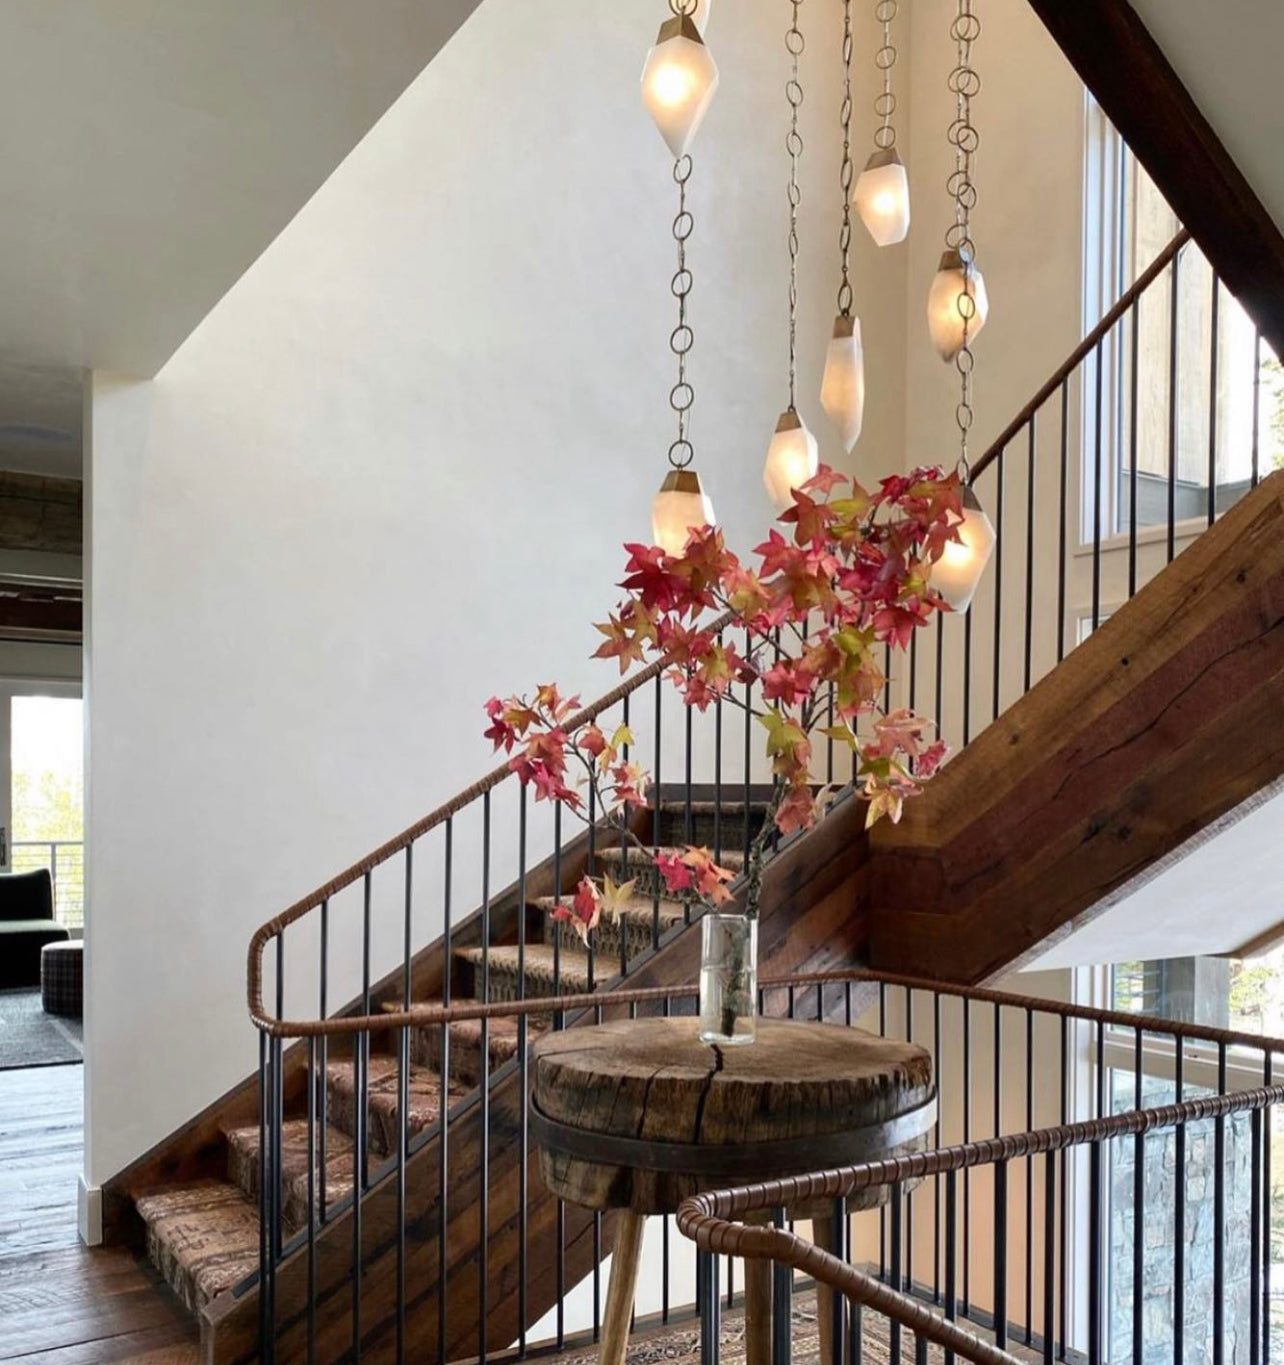 This Amber Design staircase is one of the top interior designs that have incorporated our Rand Zieber natural alabaster stone lighting into the space.